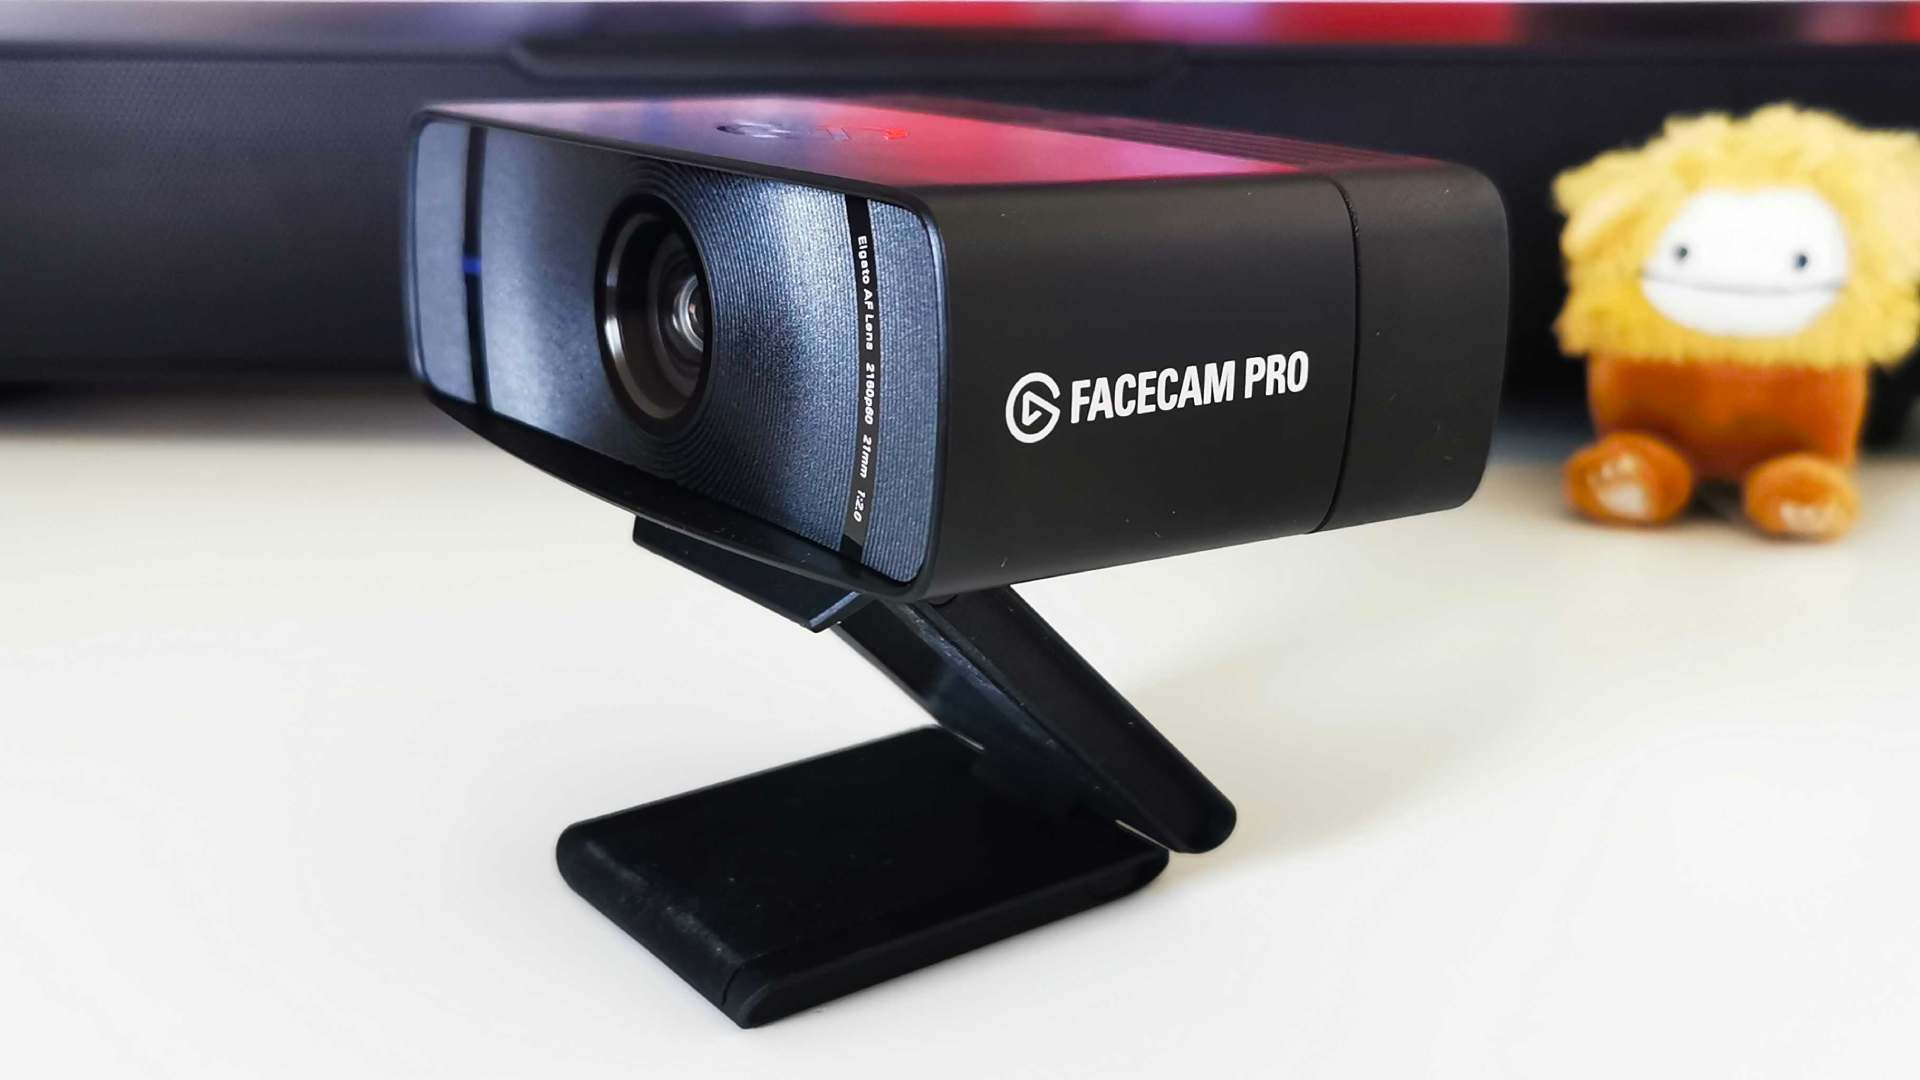 Where is the Elgato Facecam Pro? [Trying to buy, I thought it